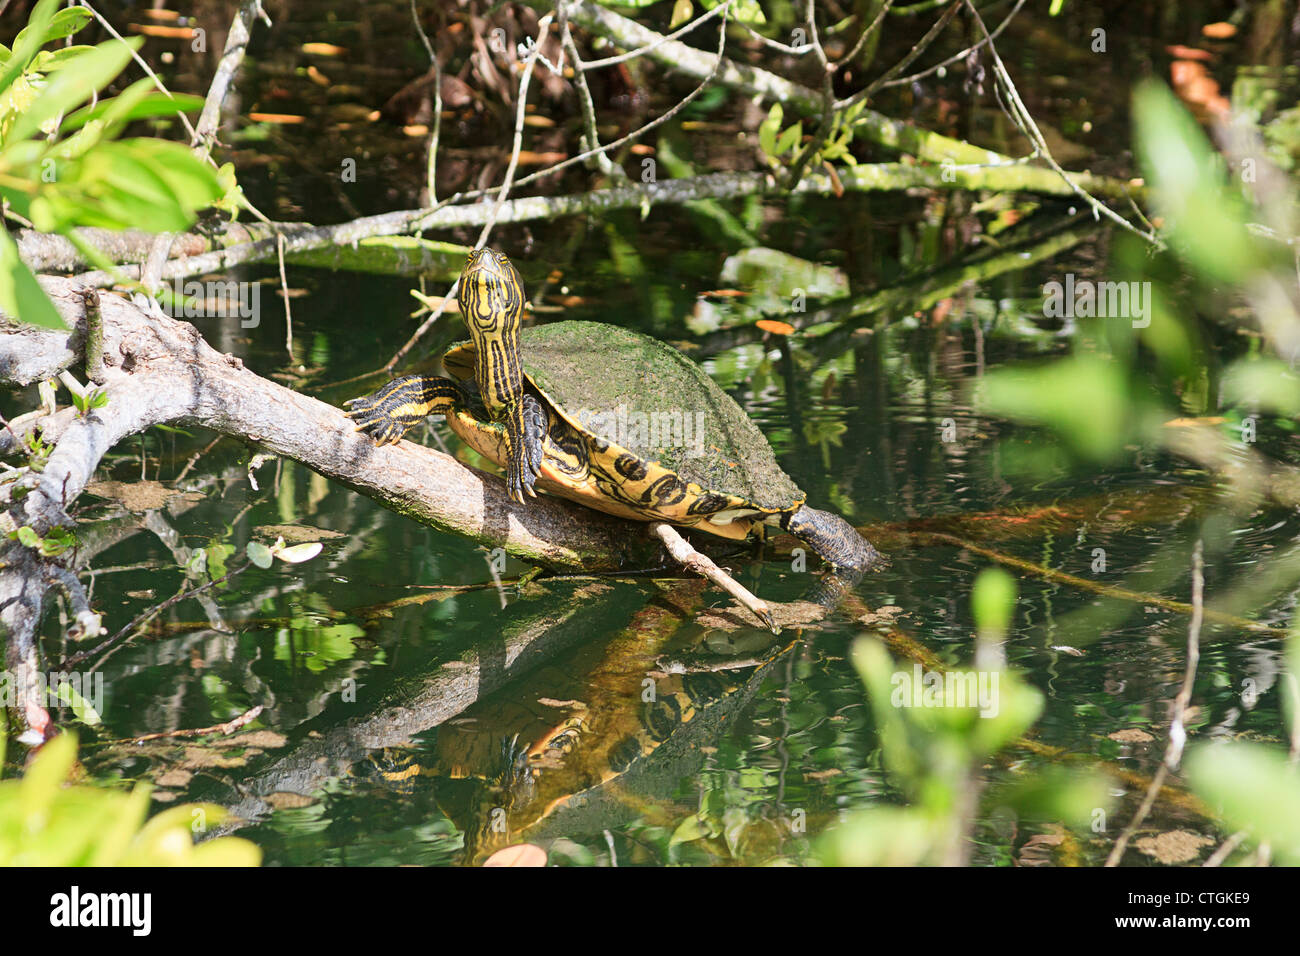 Snapping turtle on a branch in a mangrove swamp, Riviera Maya, Yucatan, Mexico. Stock Photo